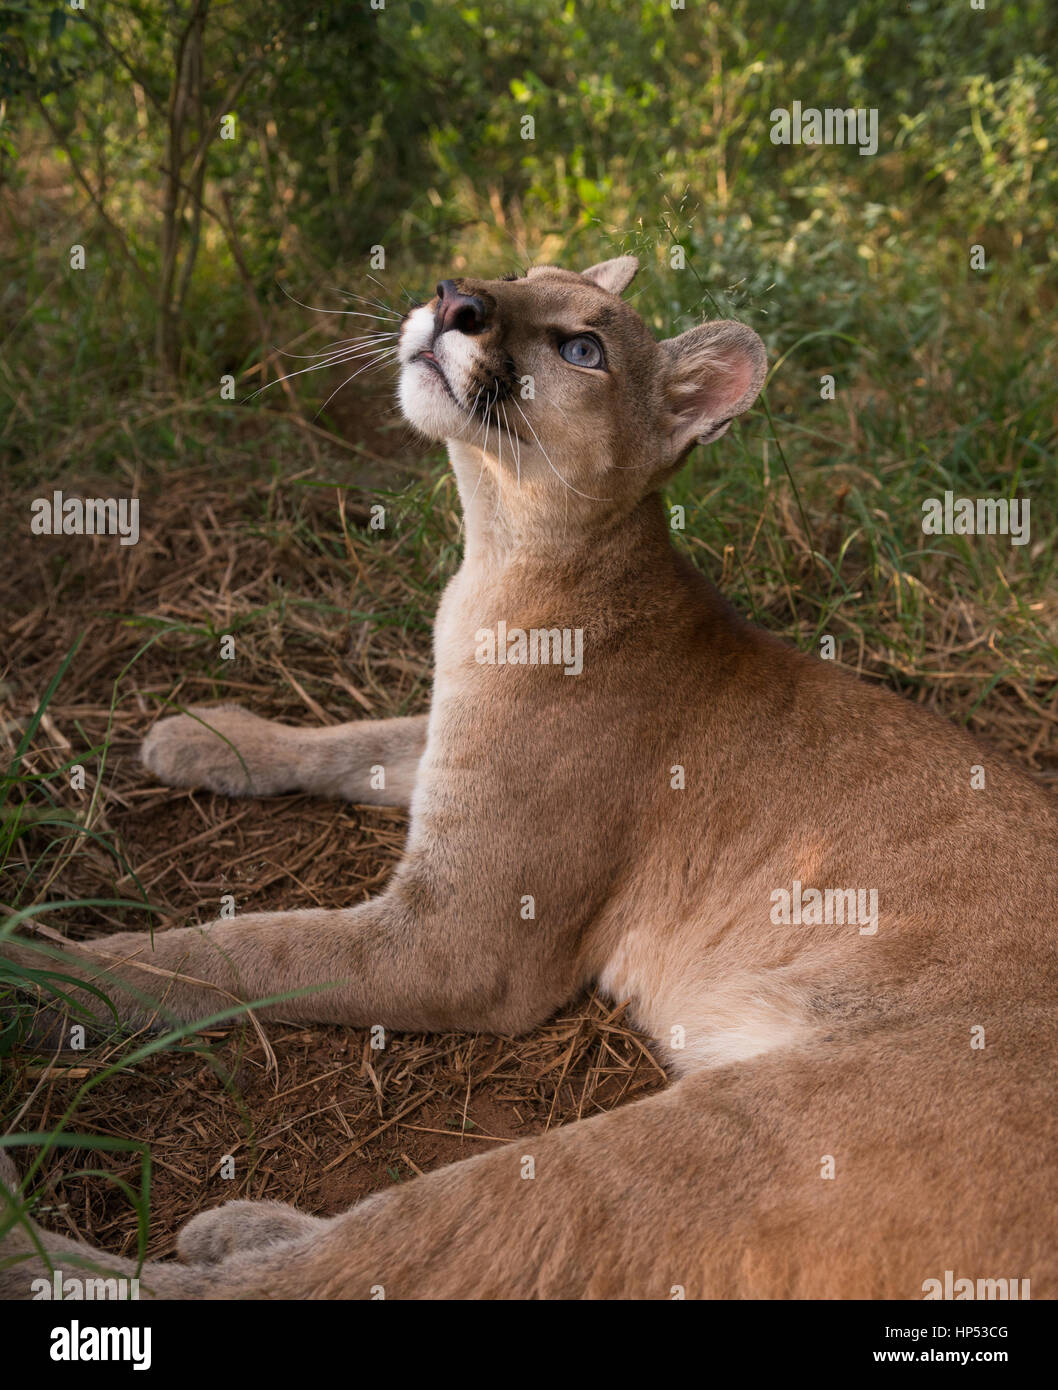 A large Puma cub from Central Brazil Stock Photo - Alamy